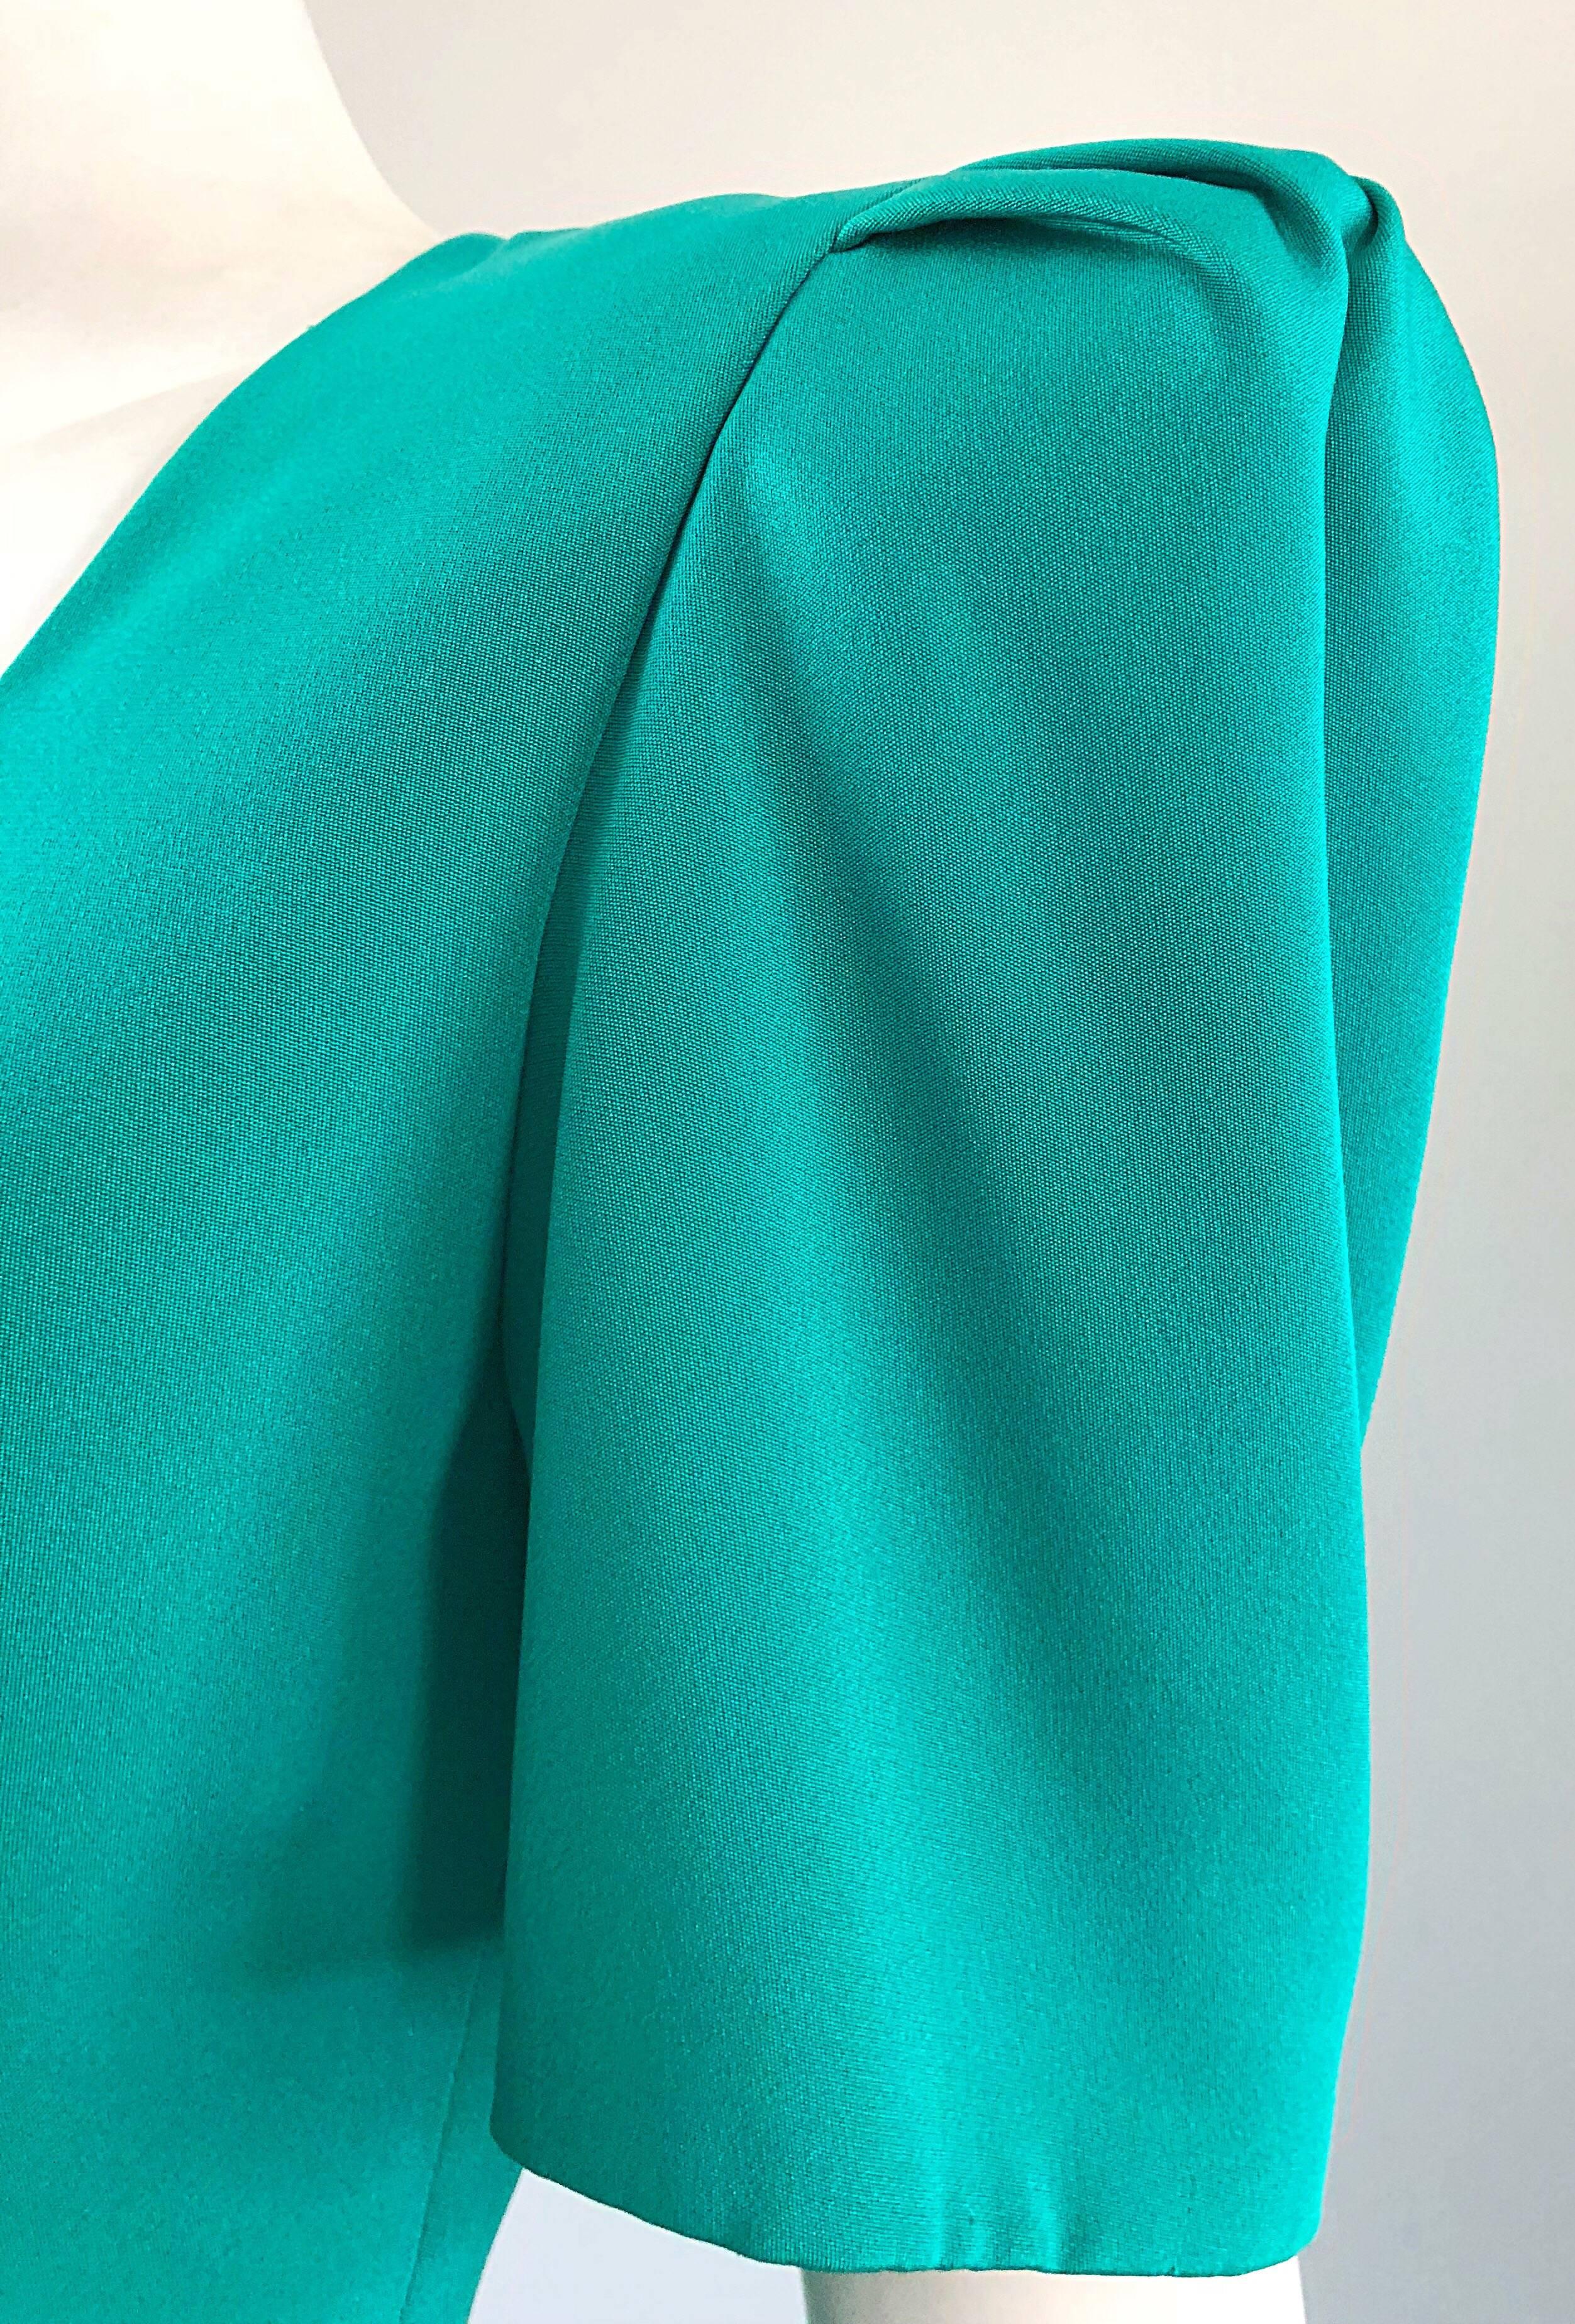 Vintage Carolina Herrera Size 6 1980s Kelly Green Strong Shoulder Silk 80s Dress In Excellent Condition In San Diego, CA